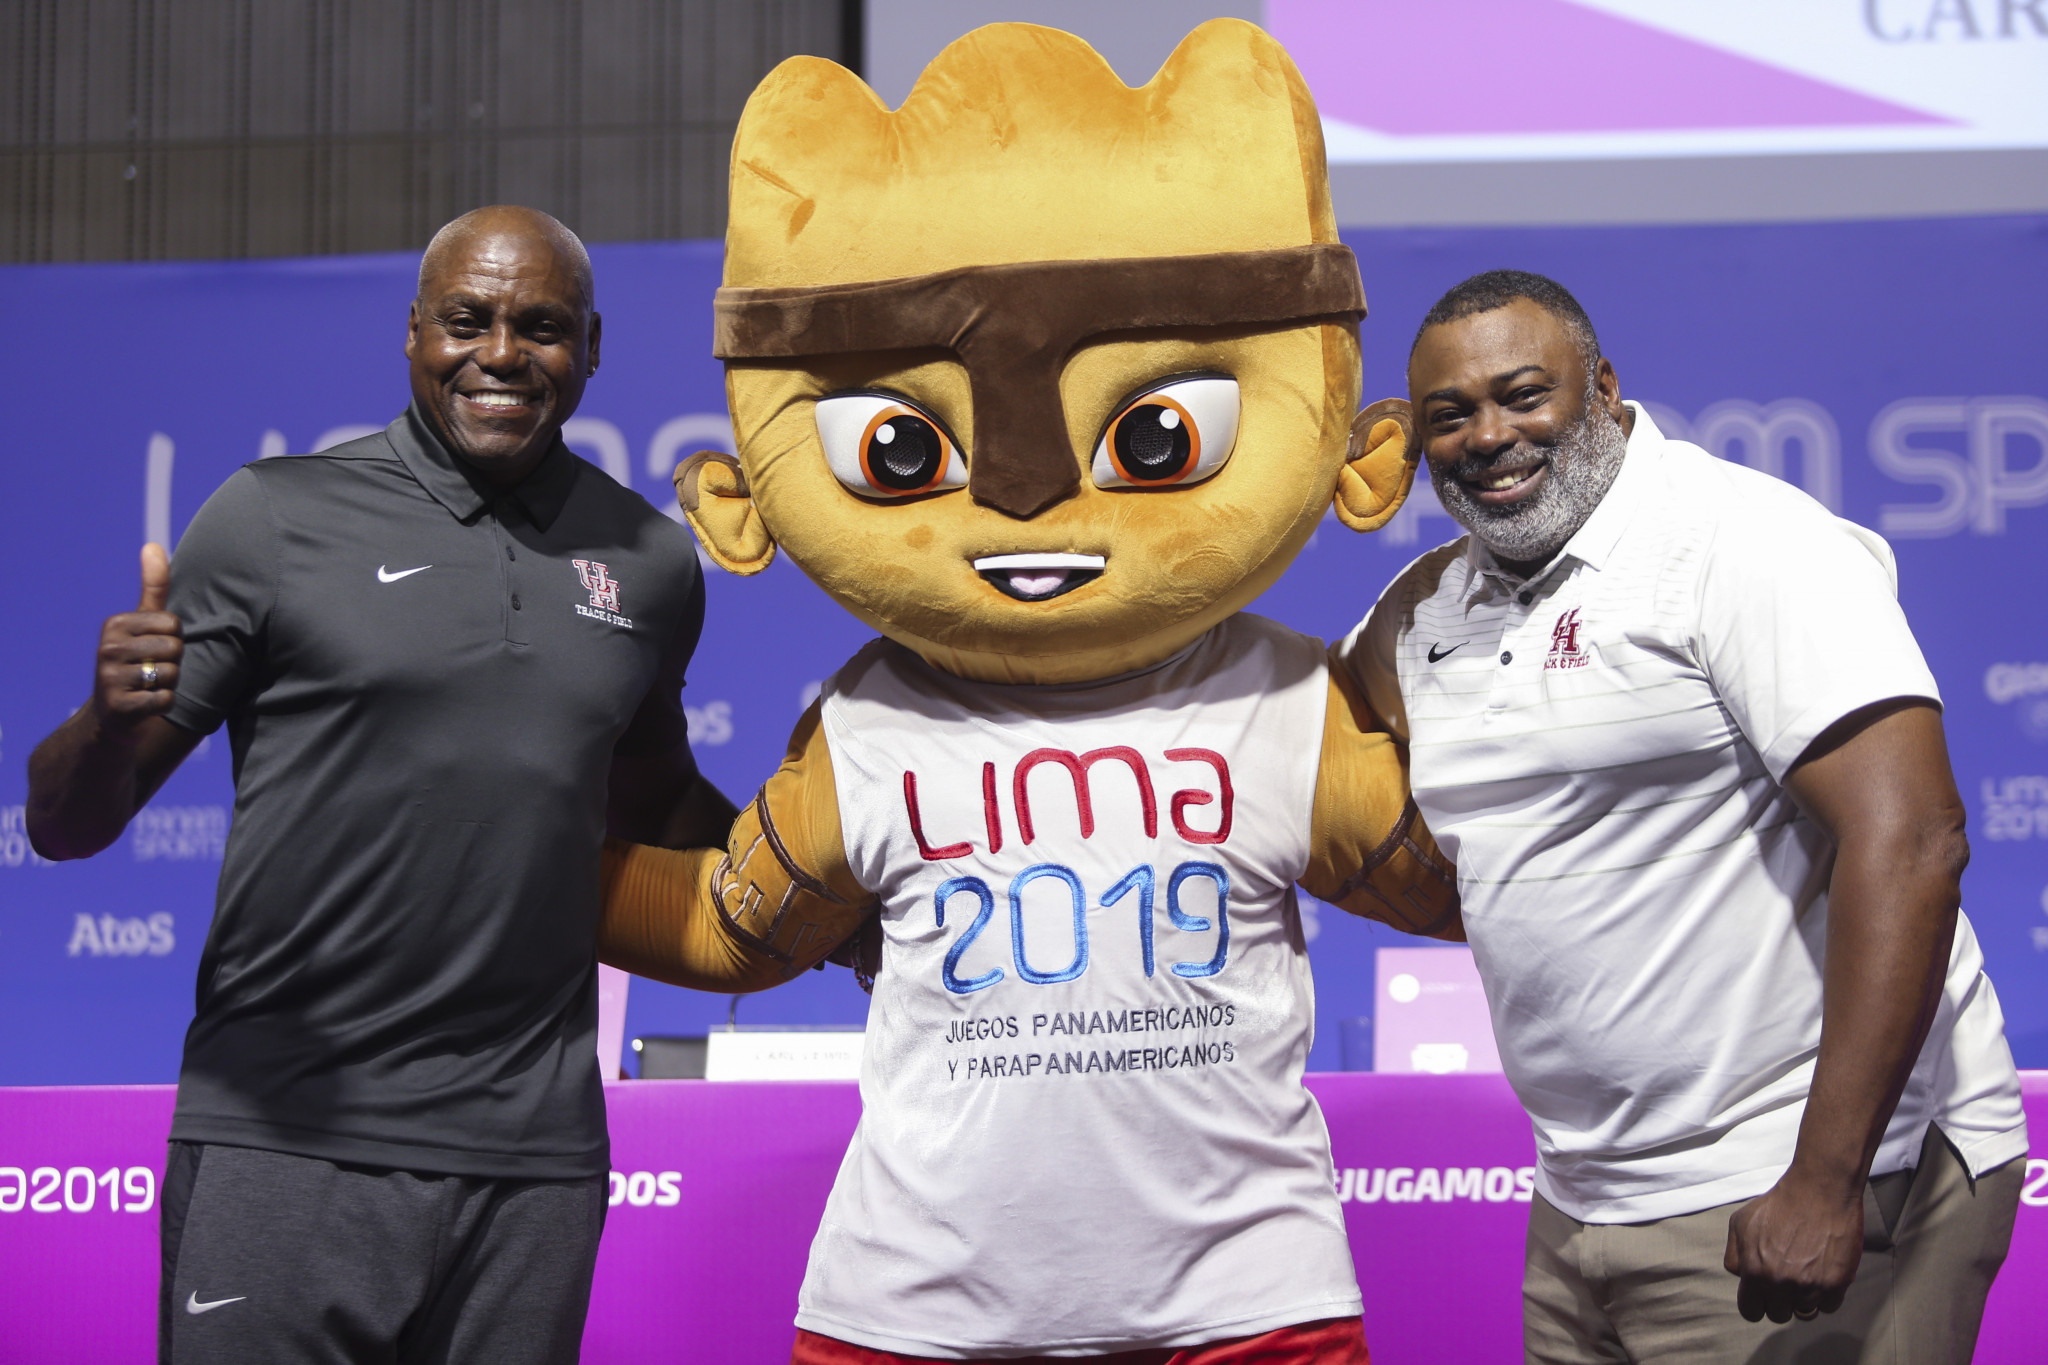 He and former teammate Leroy Burrell emphasised the importance of the Pan American Games for sport in Peru ©Lima 2019